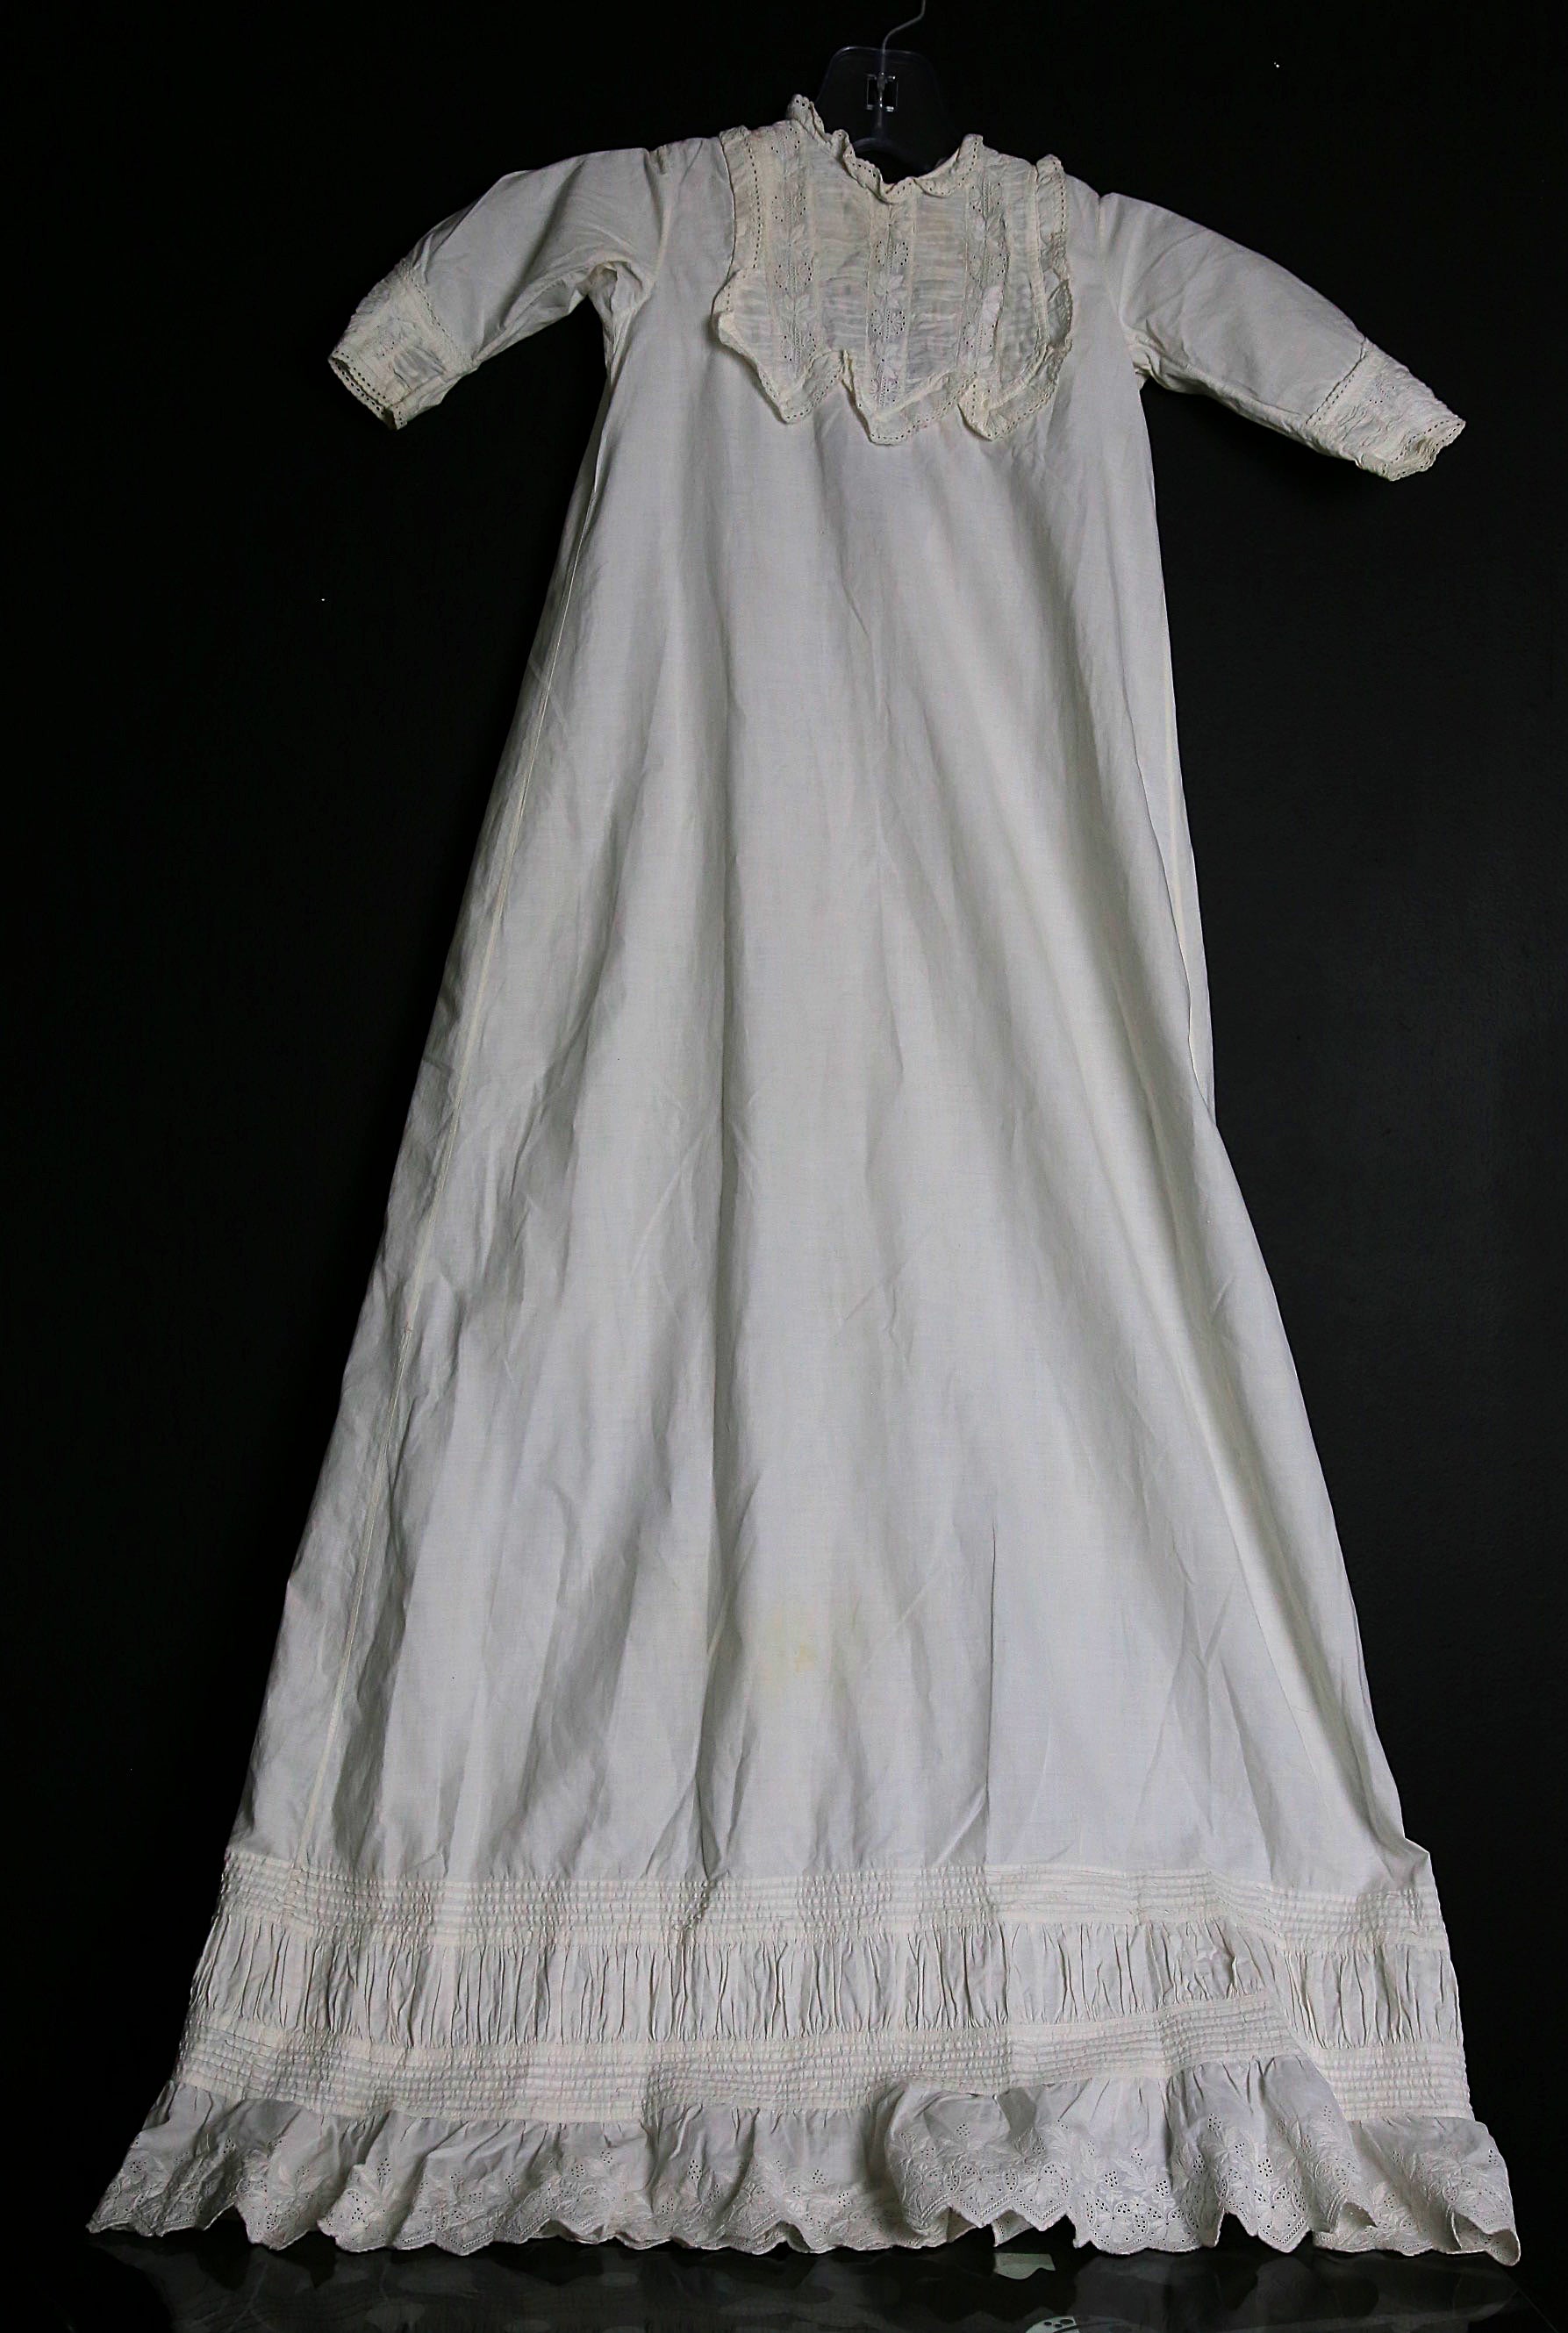 Antique baby christening gown dress heirloom Ayrshire lace